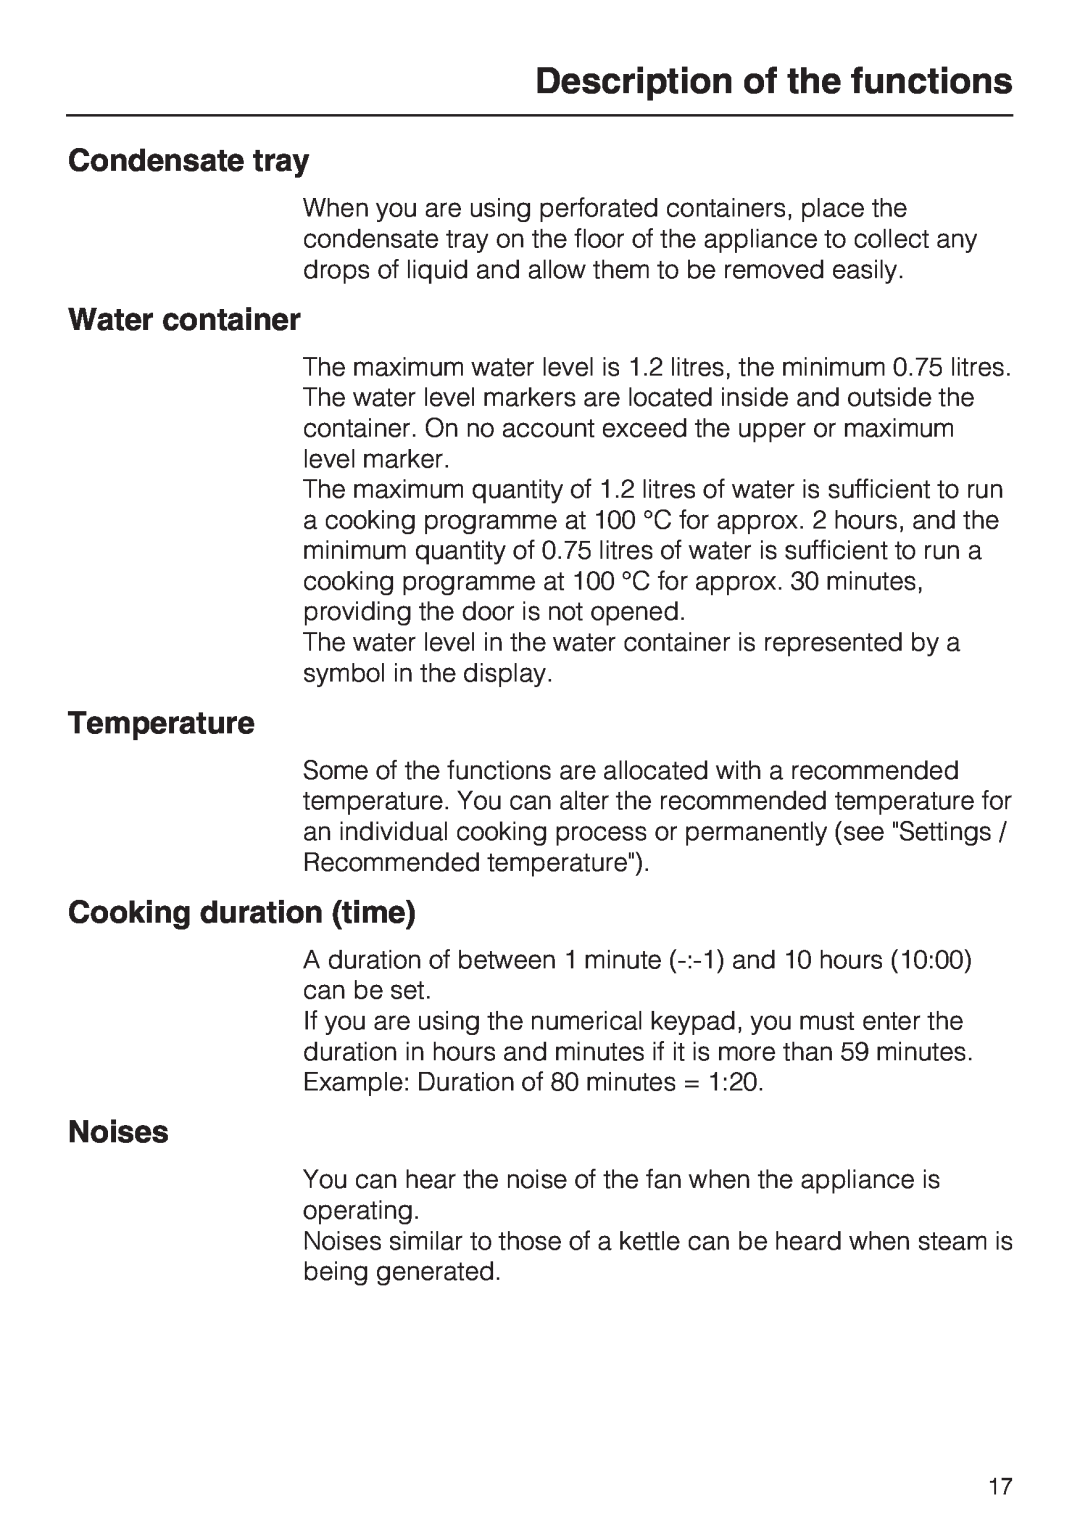 Miele DG 5080 Condensate tray, Water container, Temperature, Cooking duration time, Noises, Description of the functions 